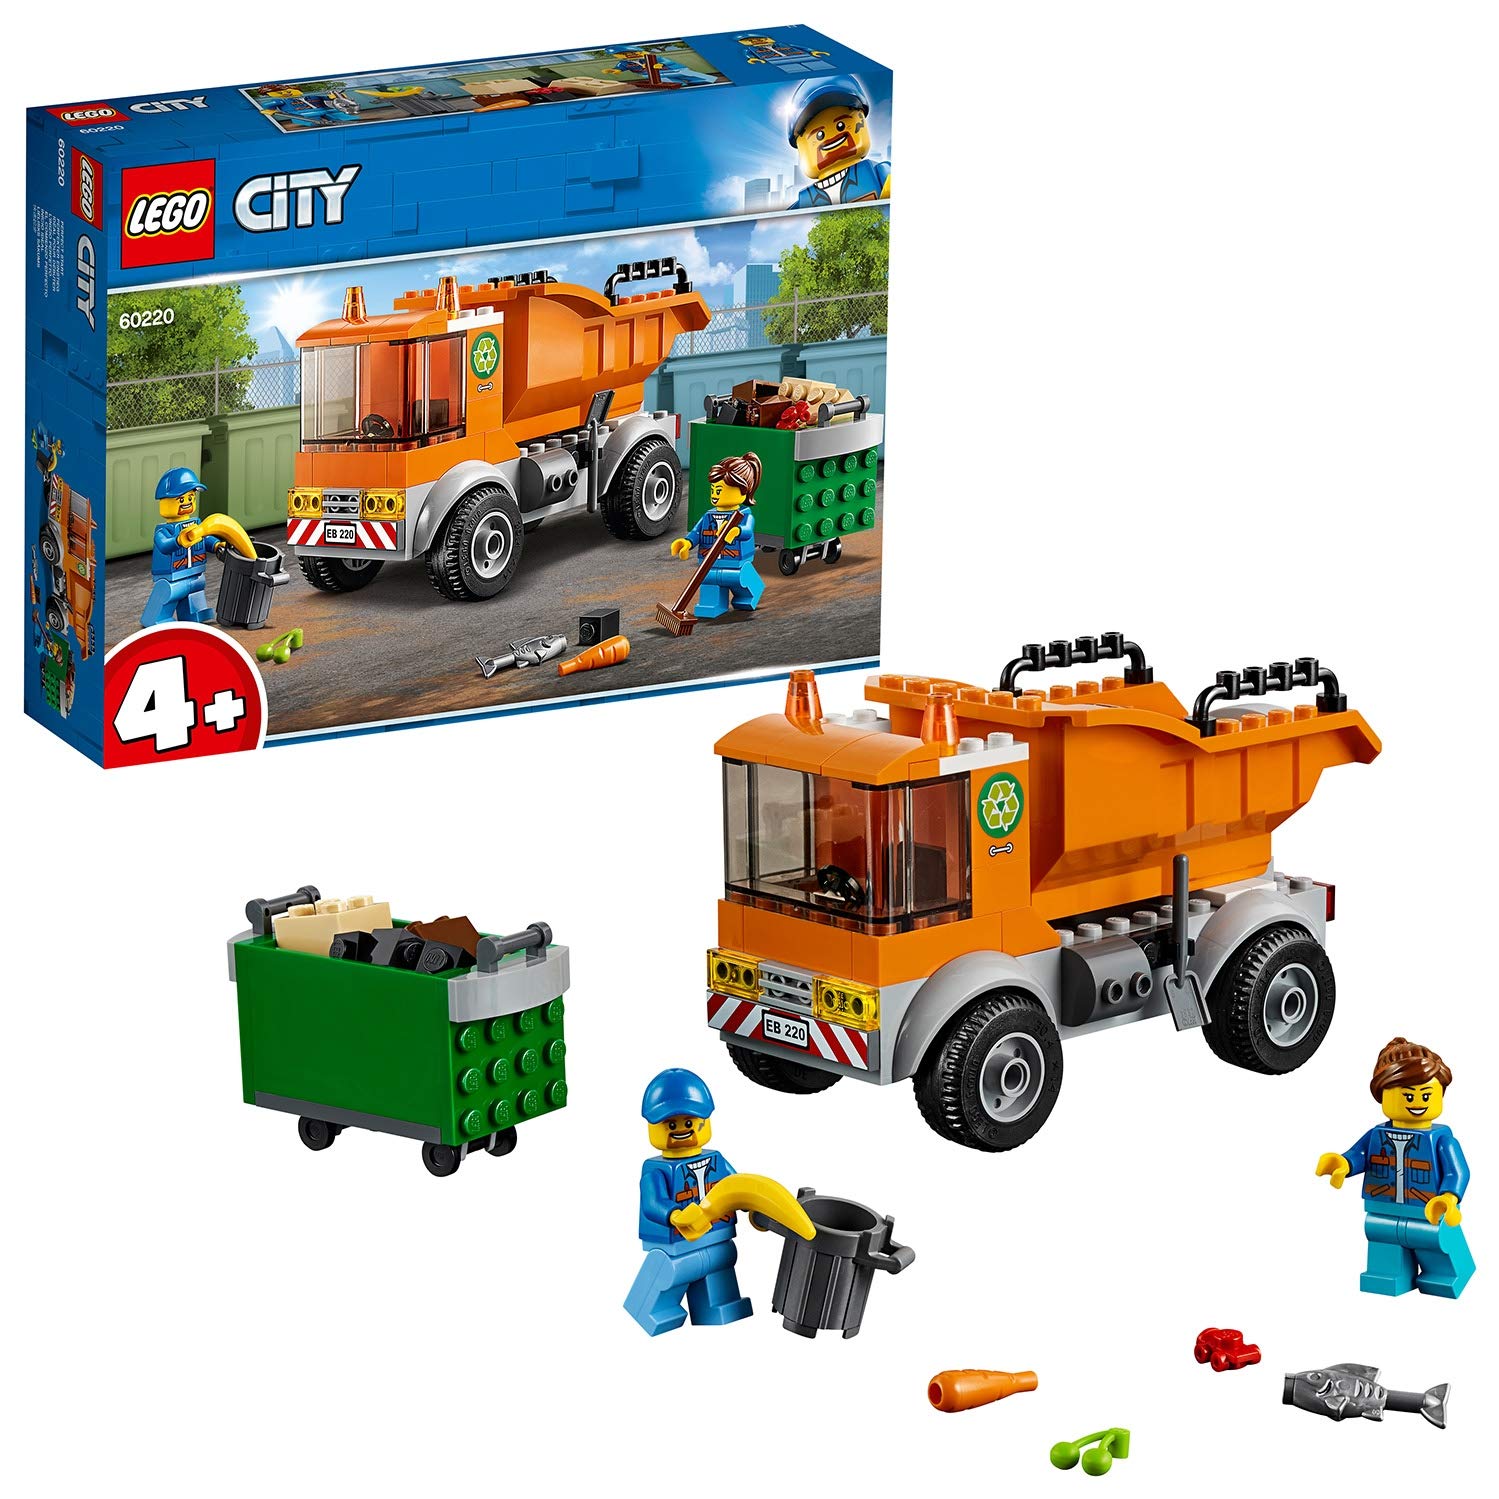 Lego City 60220 Waste Collection